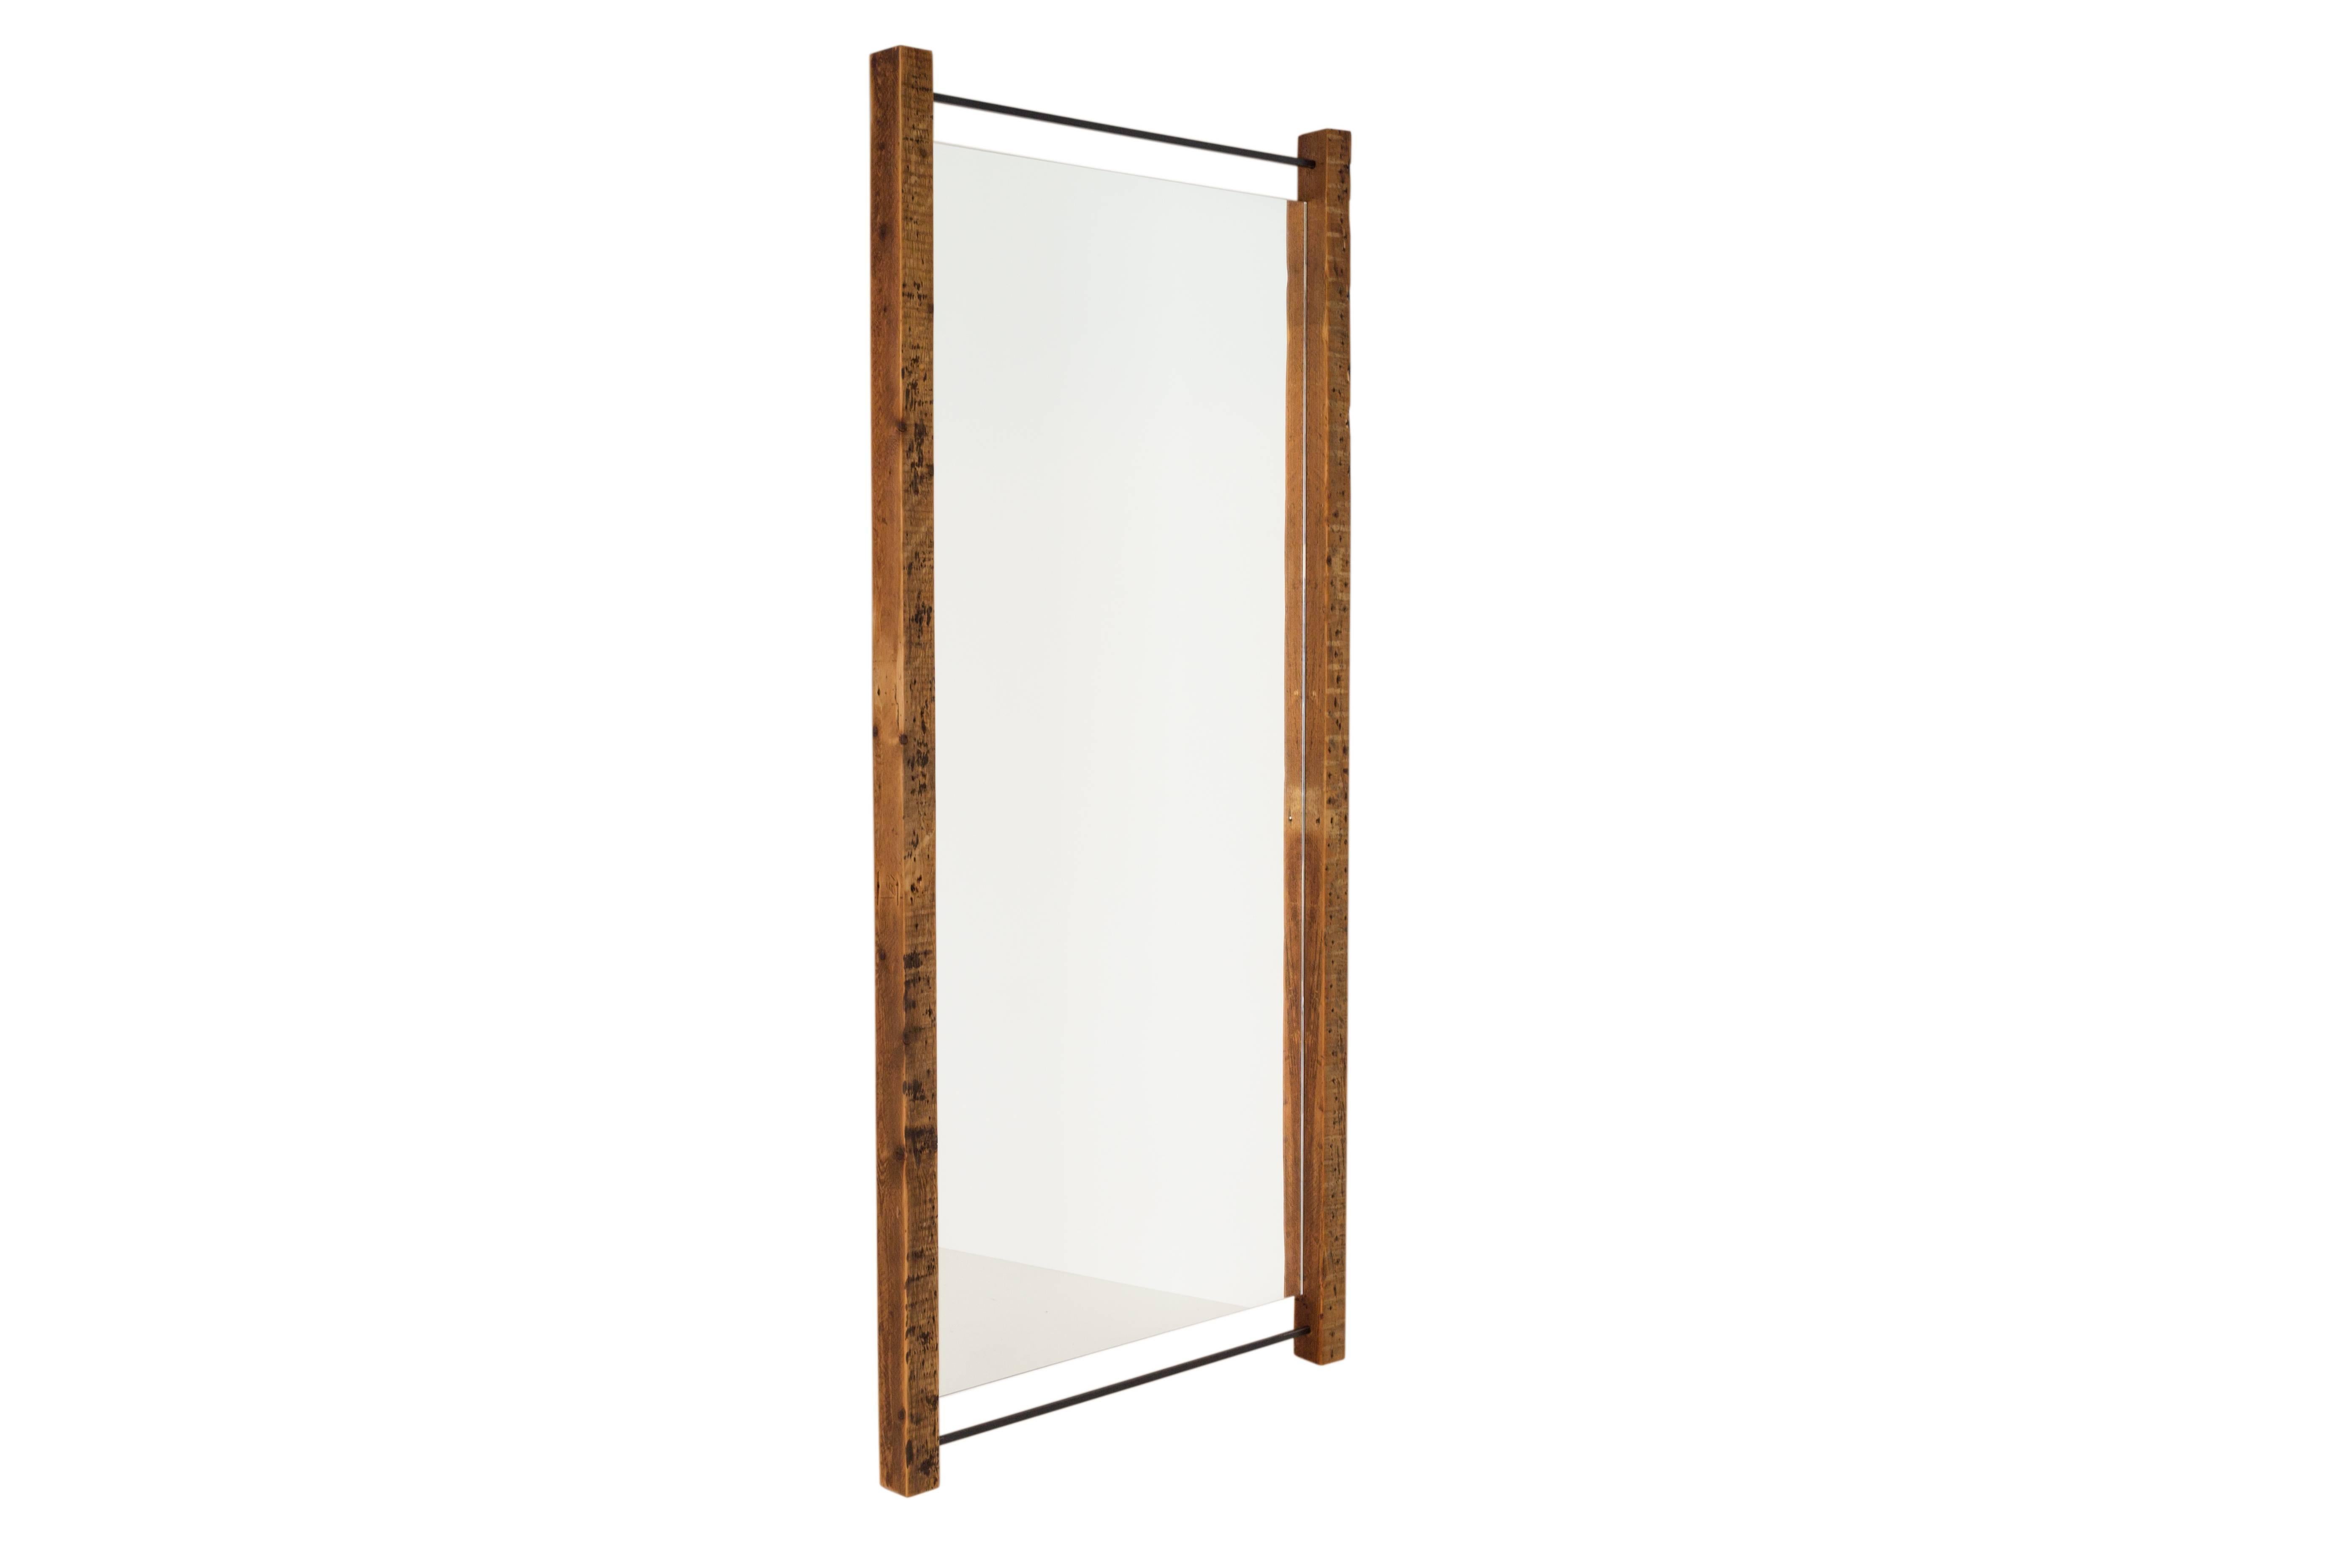 American Water Tower Mirror Featuring 200 Year Old Reclaimed Wood